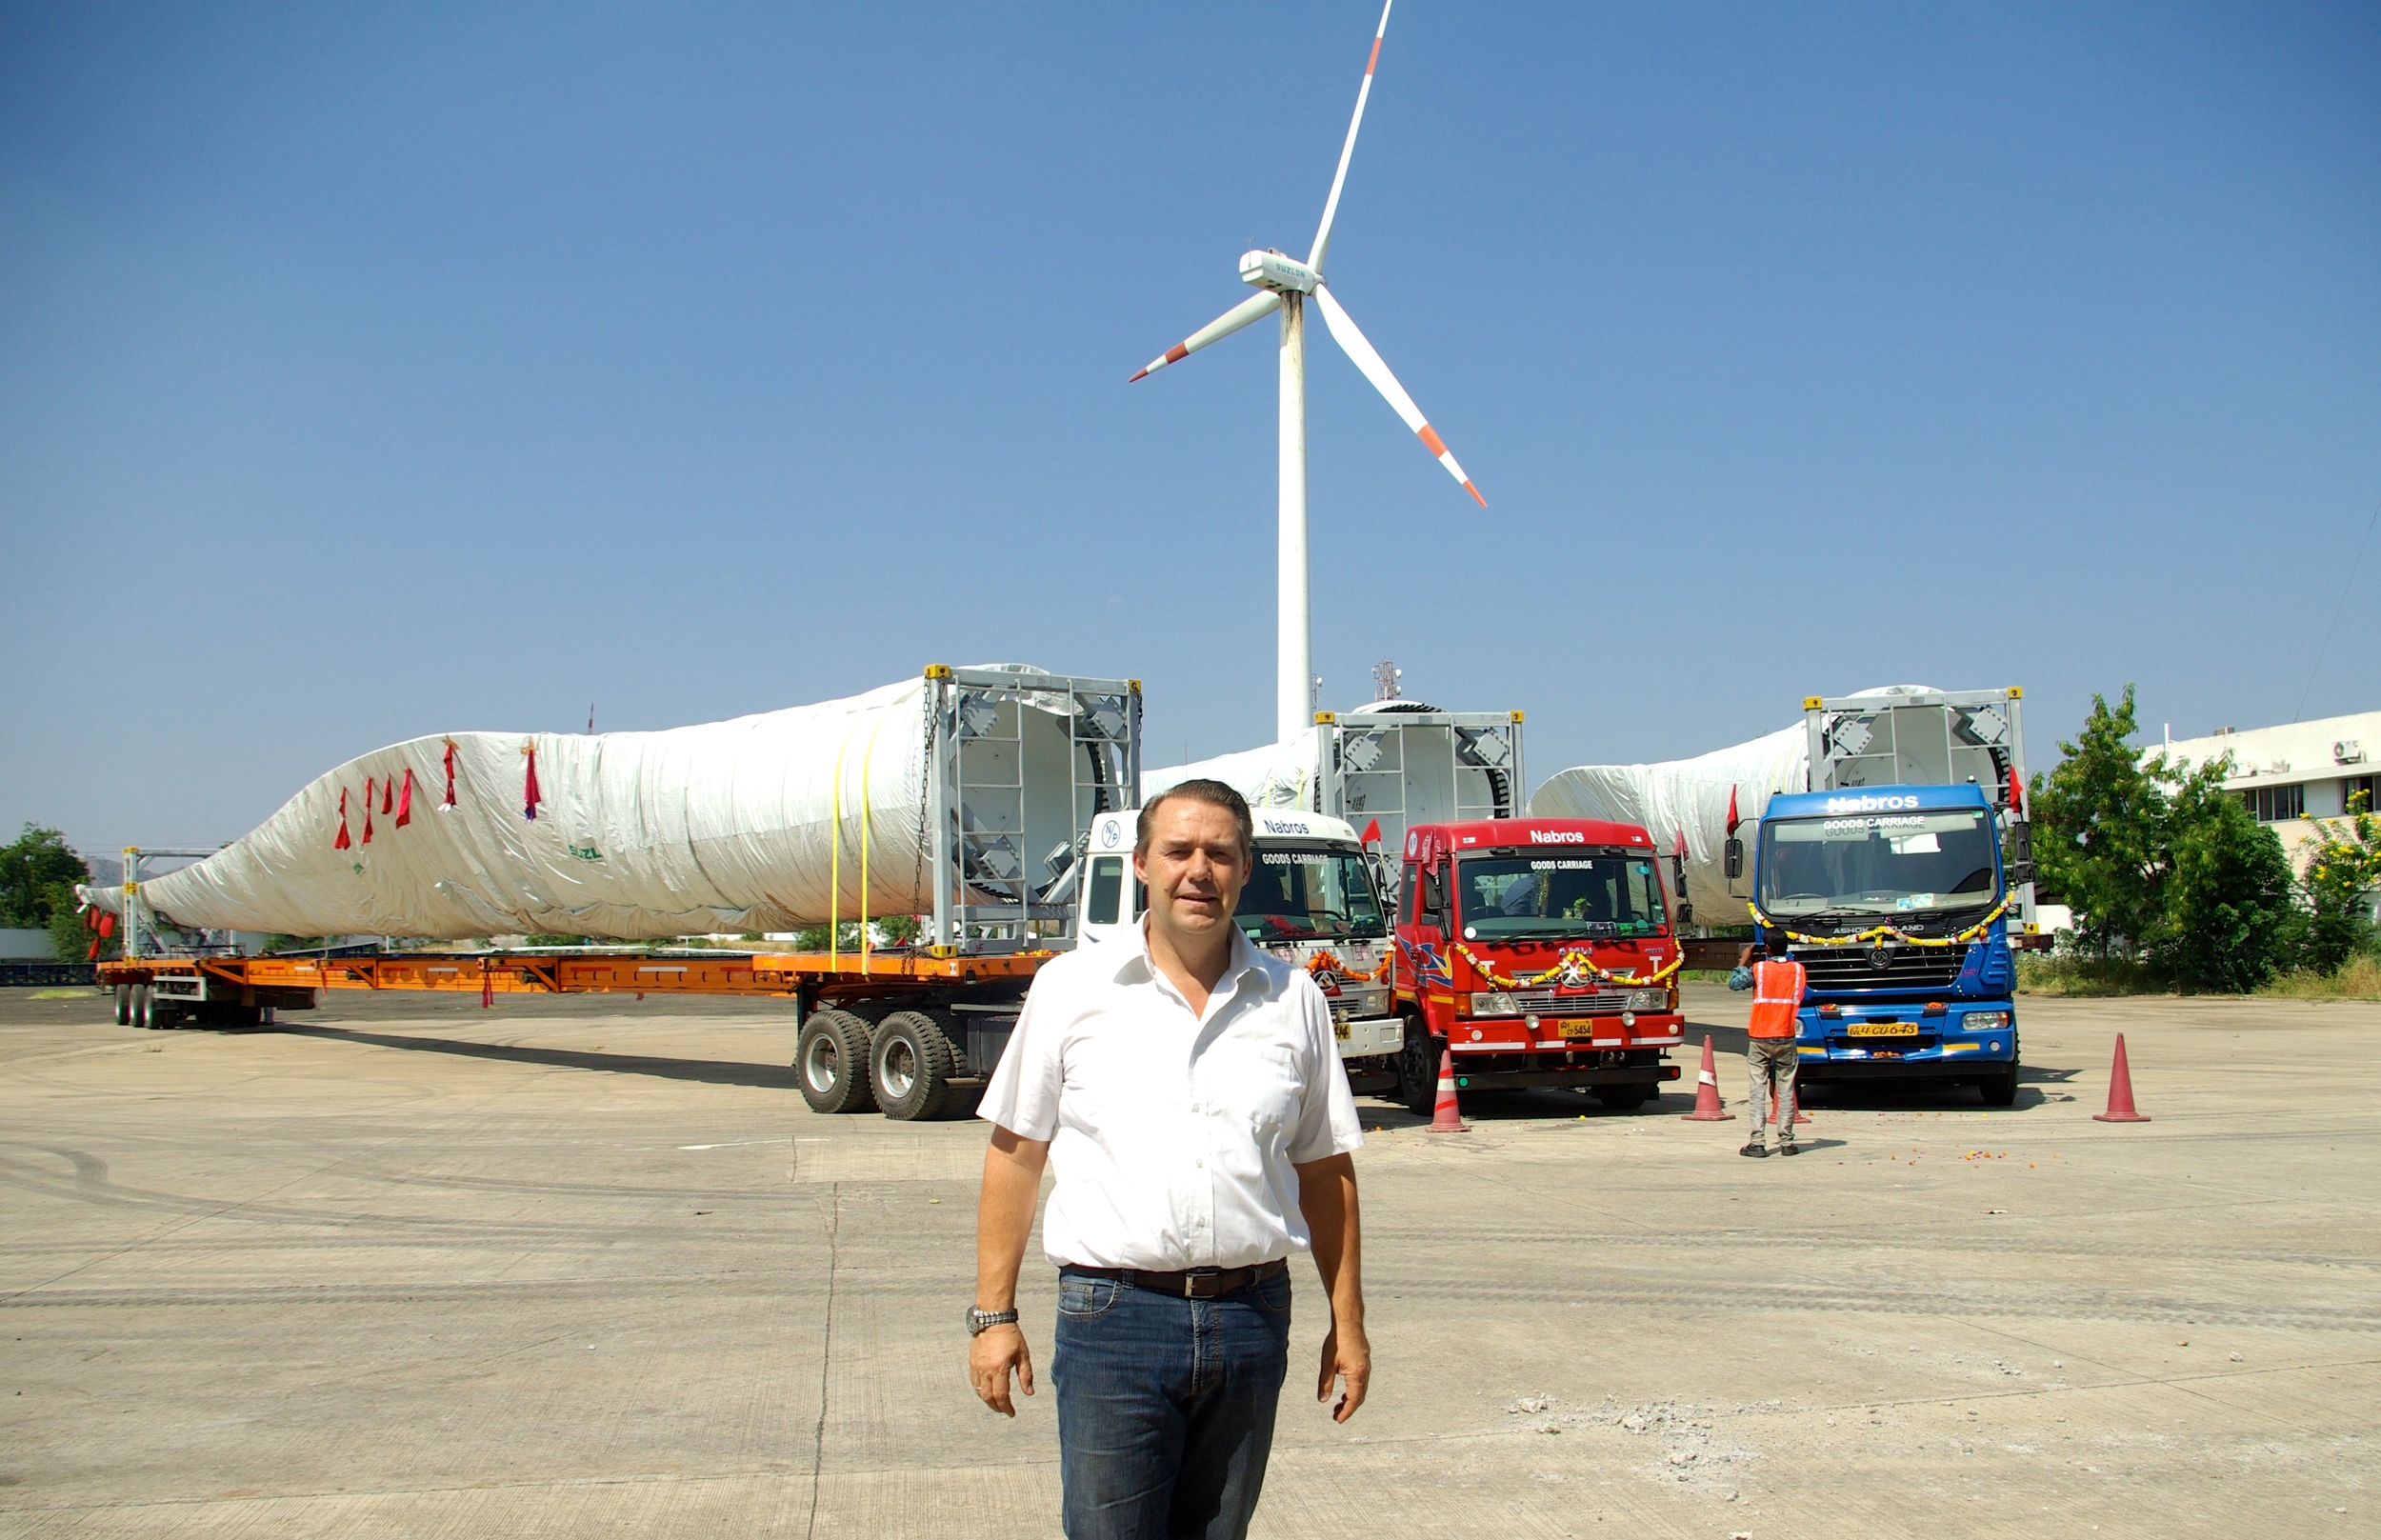 Gosse Wielinga at the production site in India